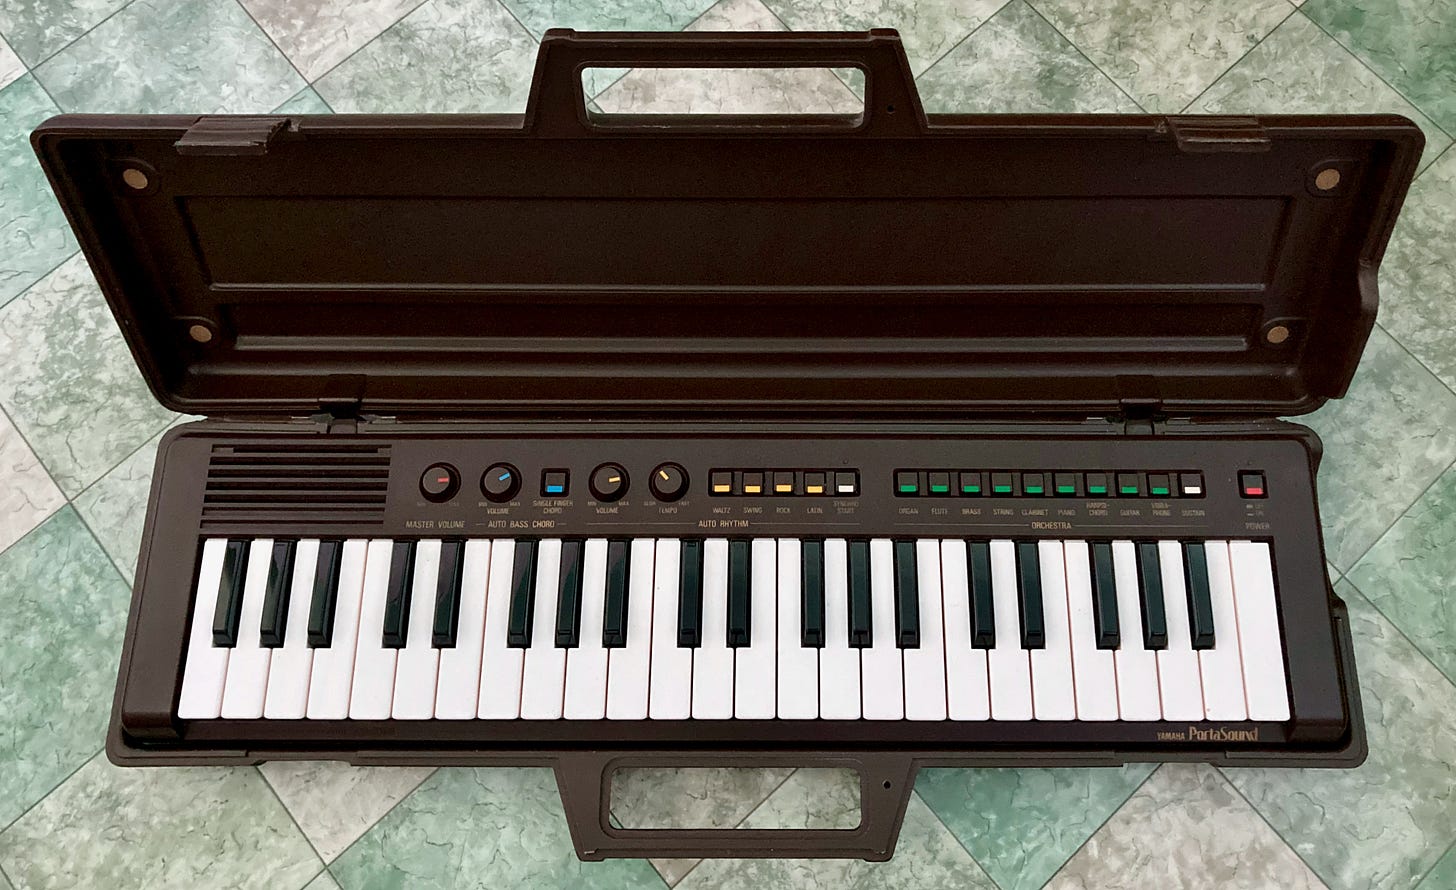 A Yamaha Portasound PS-3 music keyboard in its open case